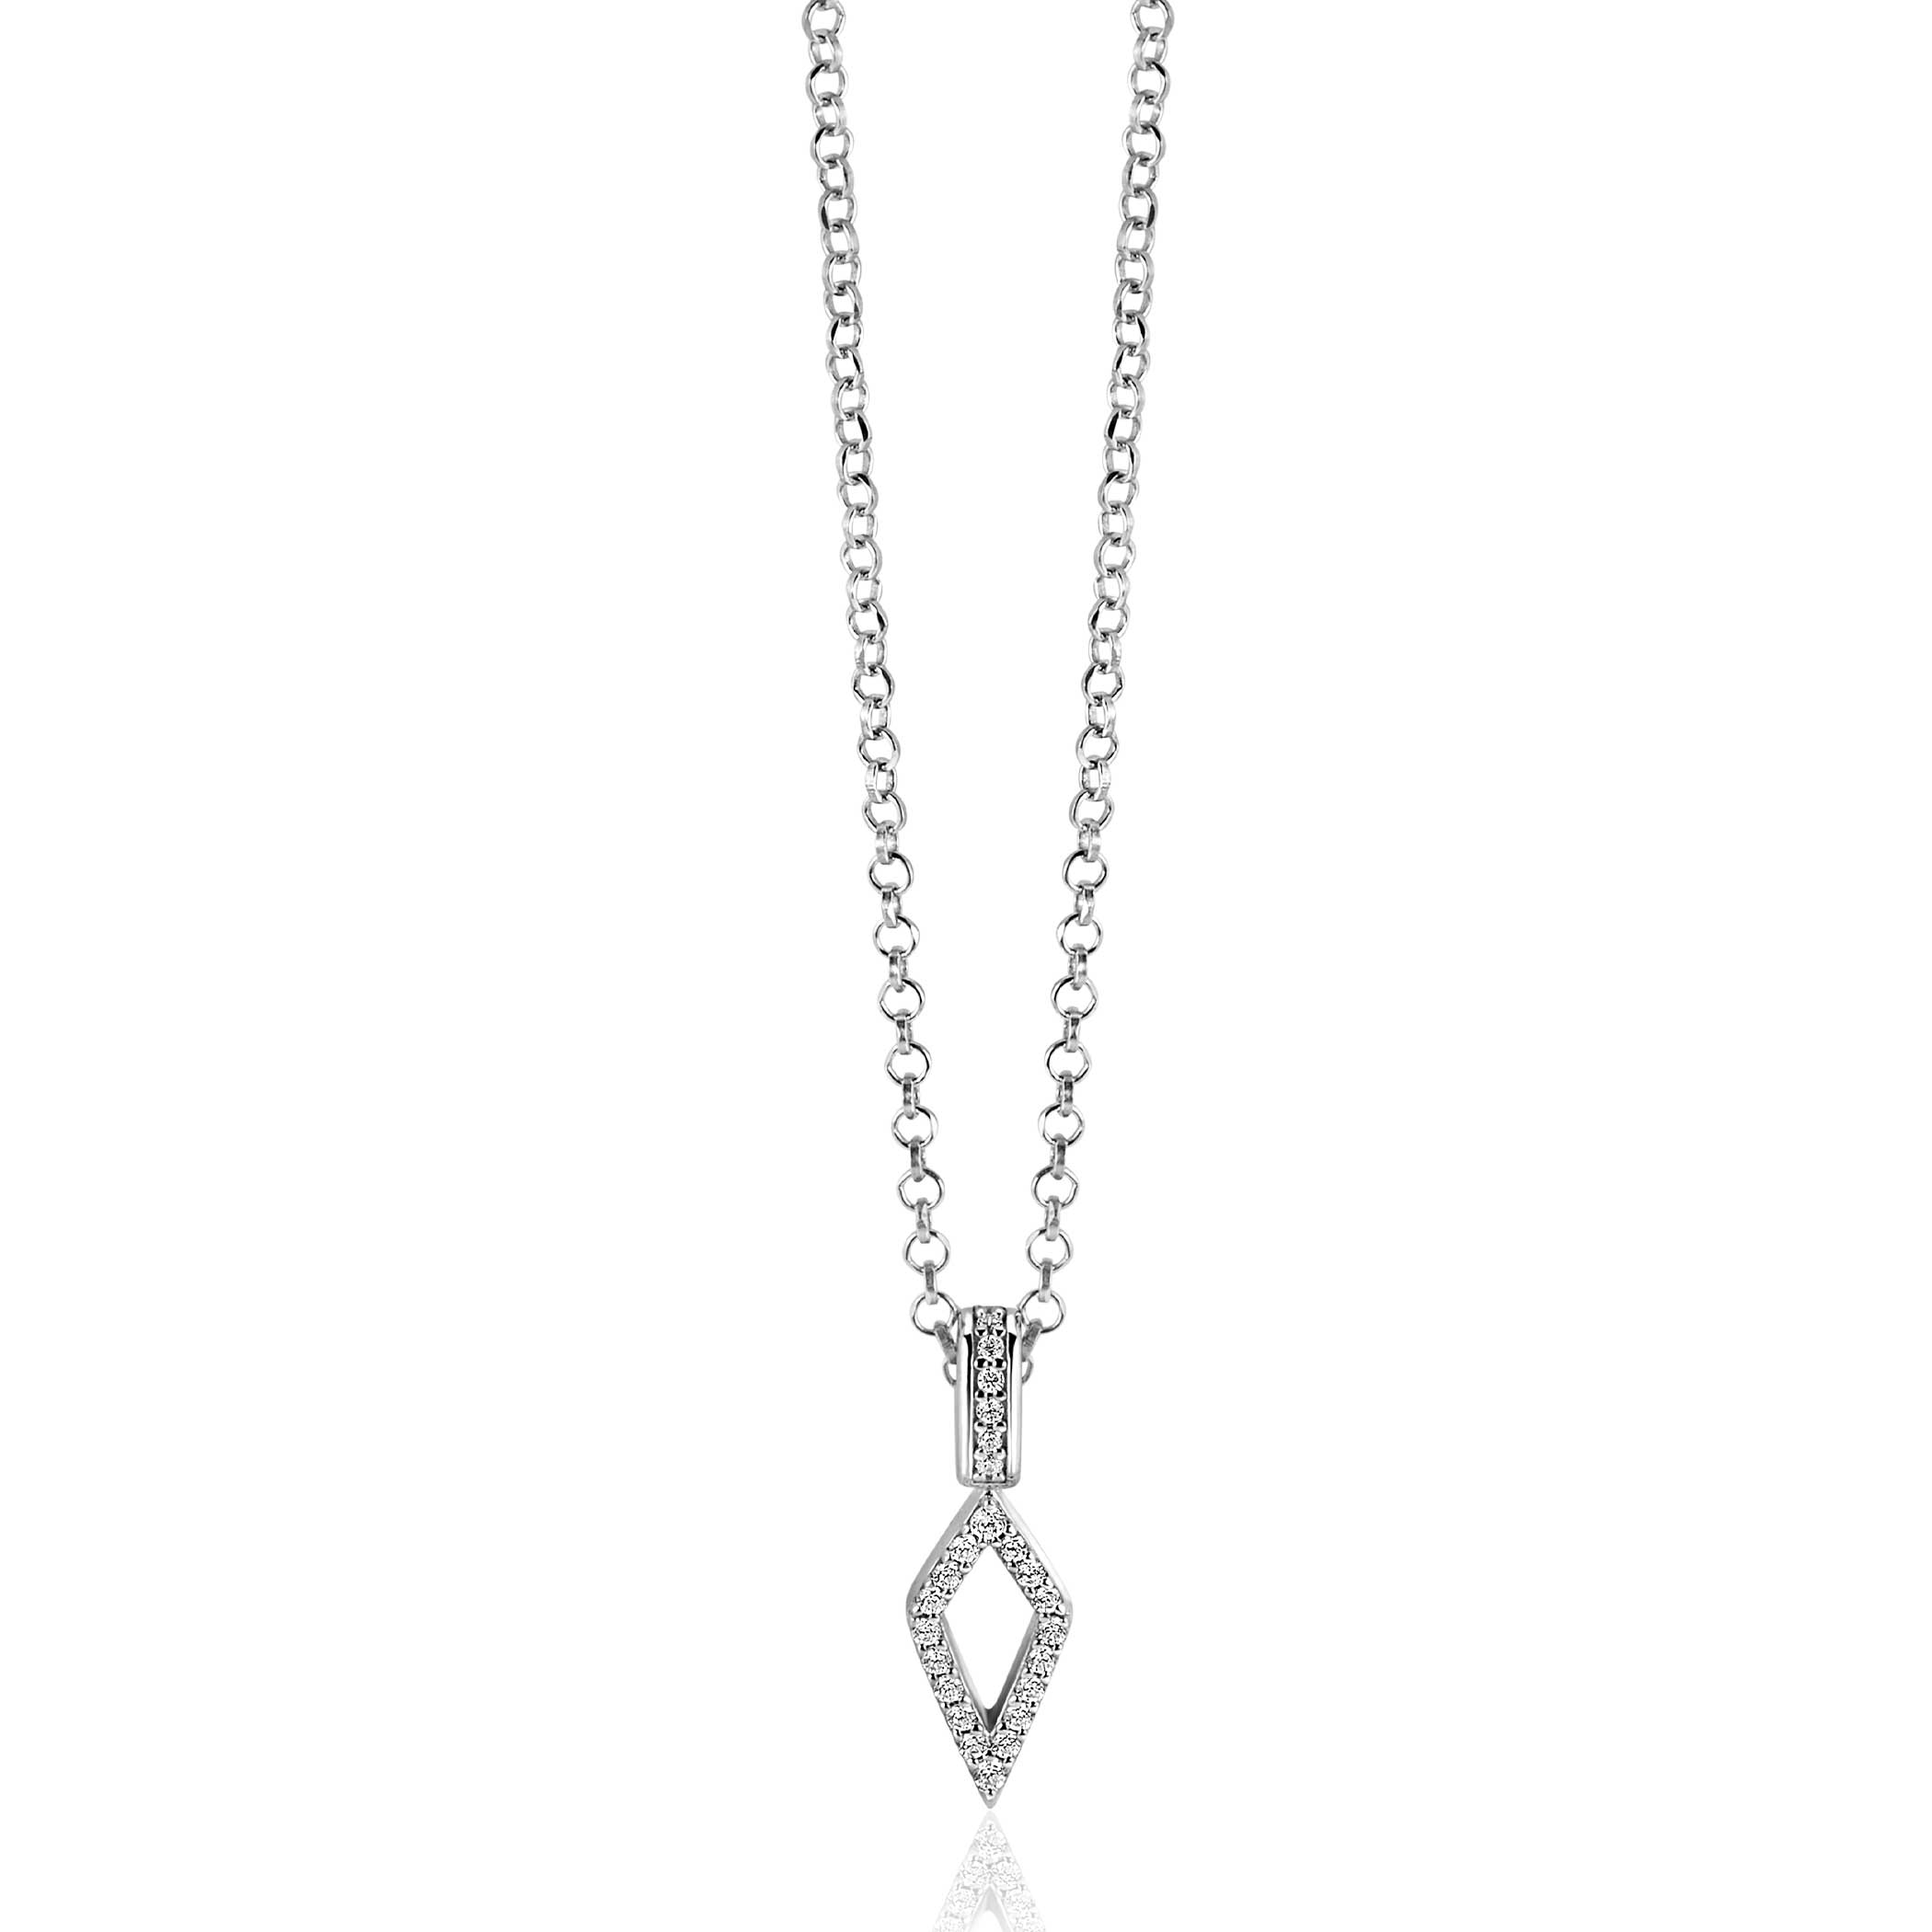 20mm ZINZI Sterling Silver Pendant Diamond-shape with White Zirconias ZIH2497 (excl. necklace)